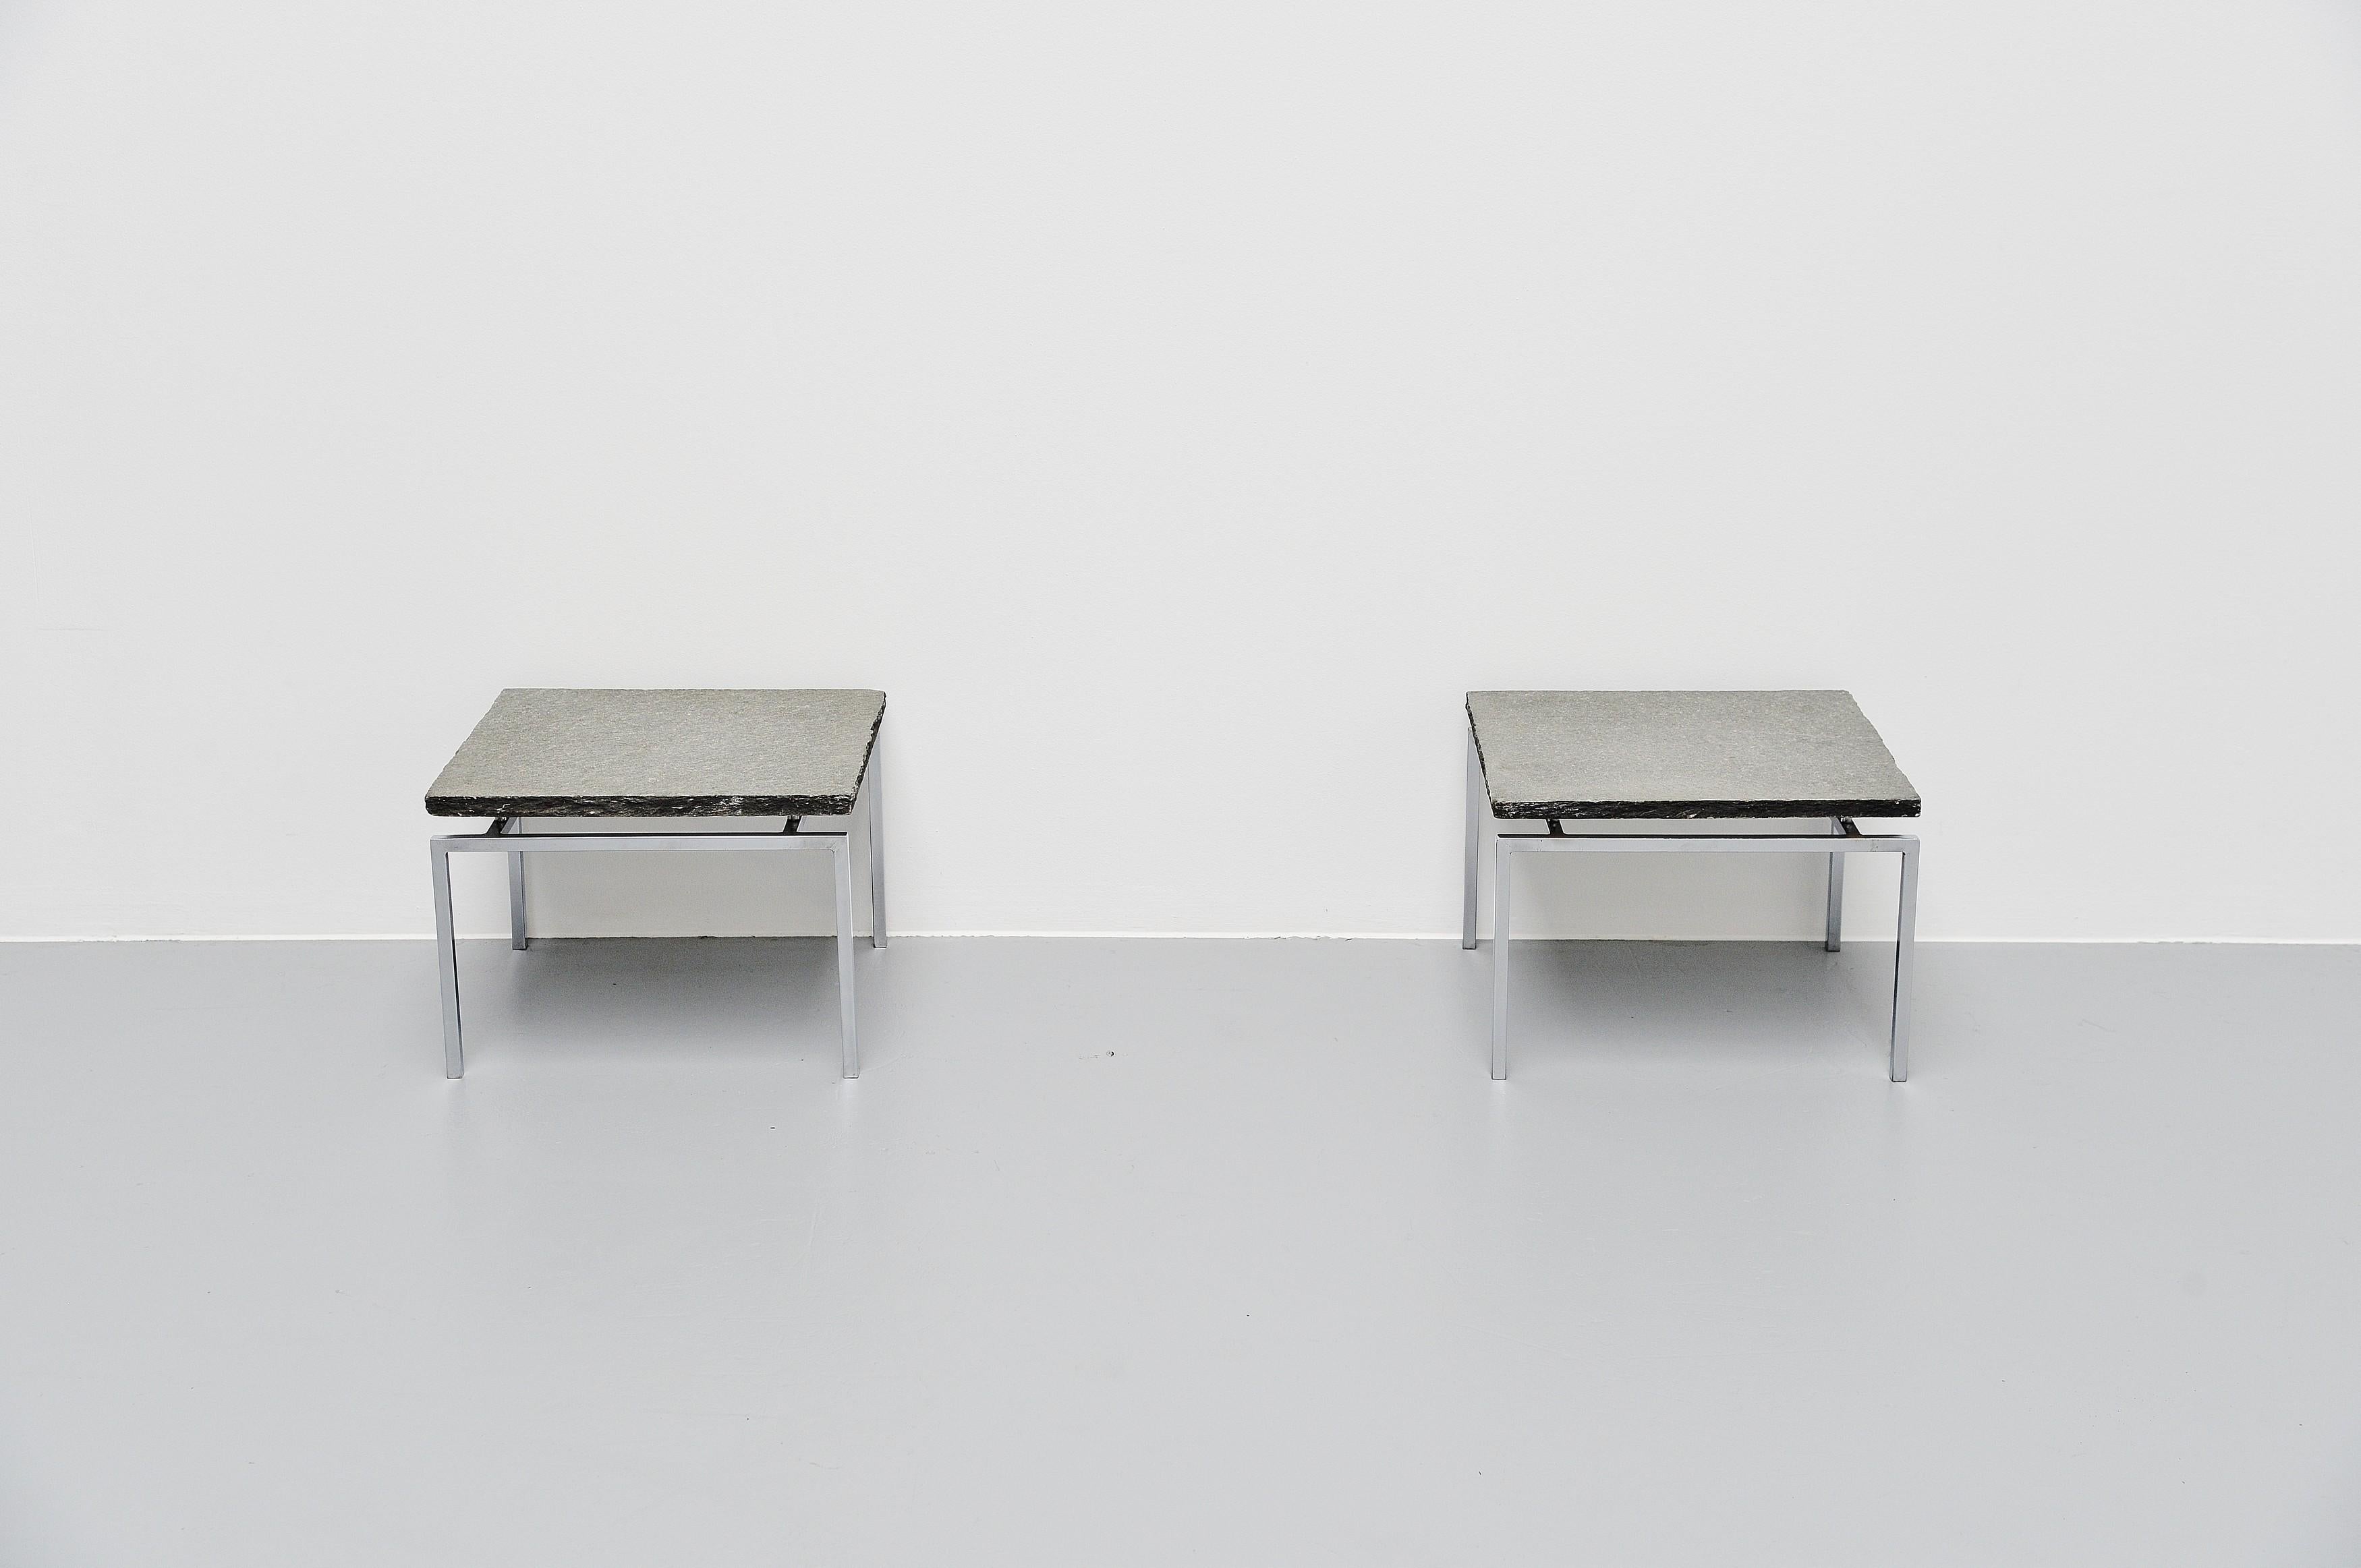 Nice pair of minimalist side tables by unknown designer or manufacturer, Denmark, 1960. Very nice tubular chrome-plated frames with hand cut slate tops with rough sides. Very nice grey colored slate tops with nice veins in the slate stone. Tables